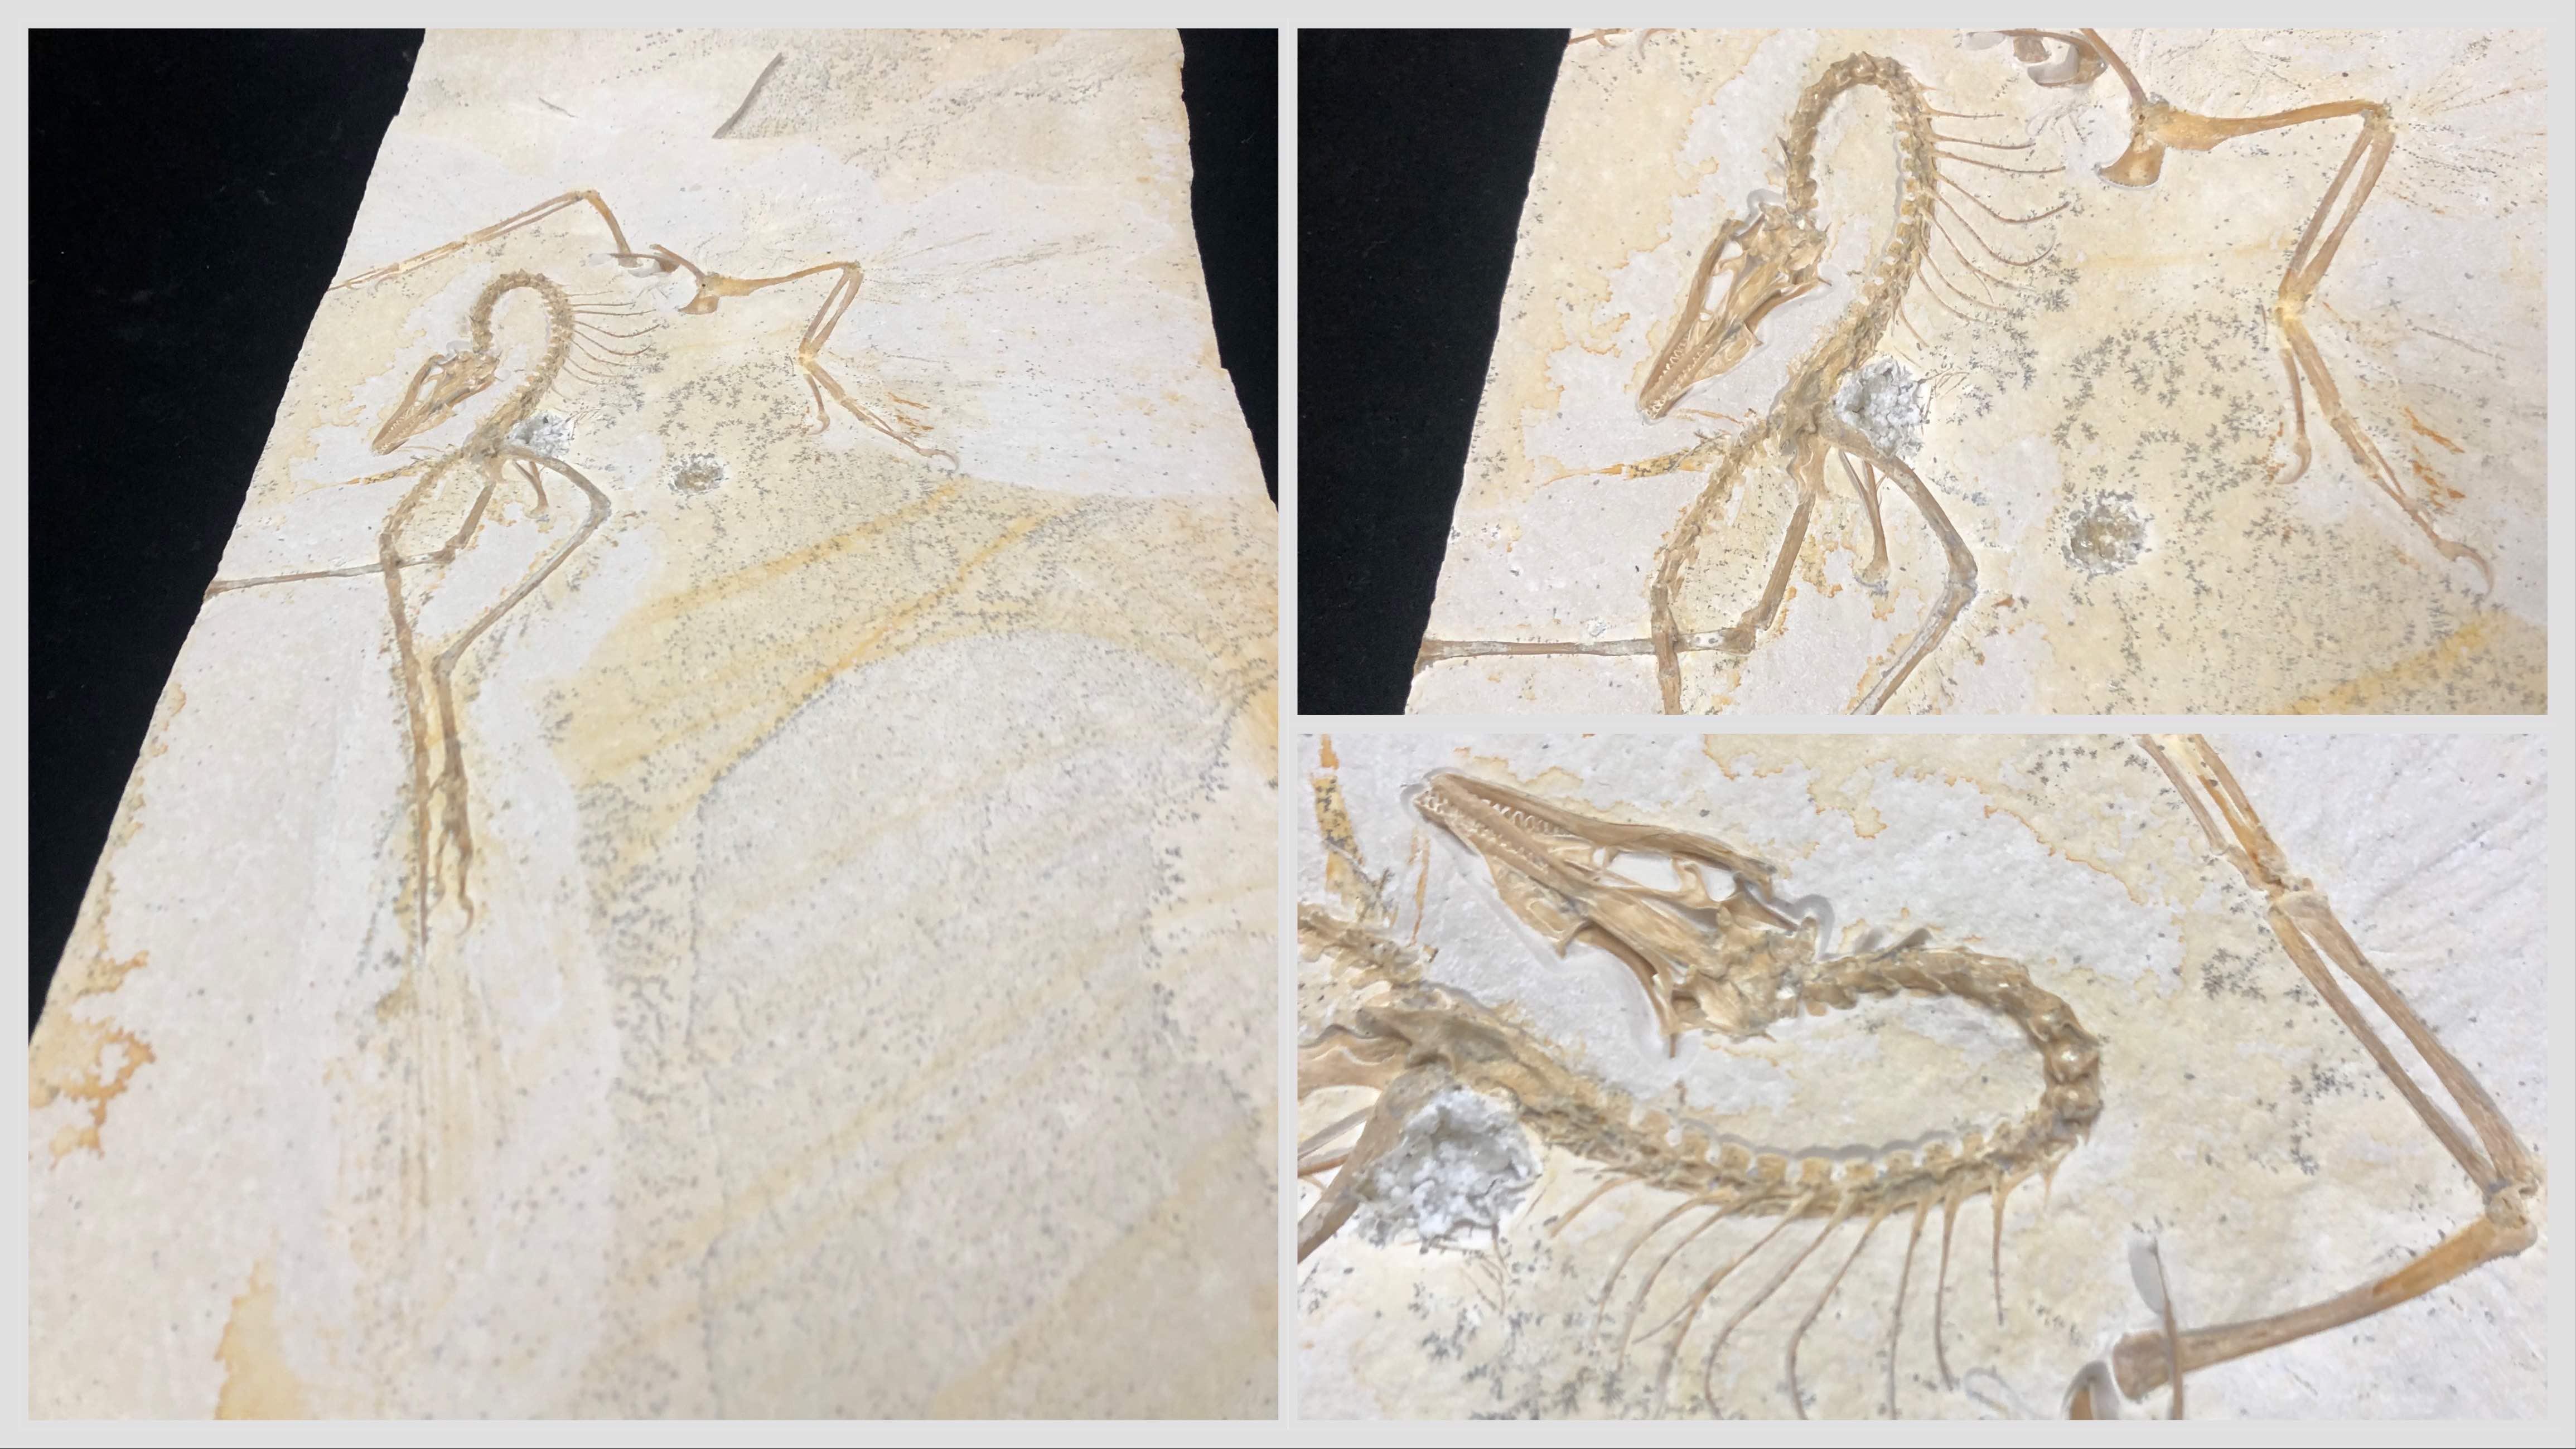 The Field Museum has acquired the 13th known specimen of Archaeopteryx, often called the “missing link” fossil between dinosaurs and birds. (Patty Wetli / WTTW News)